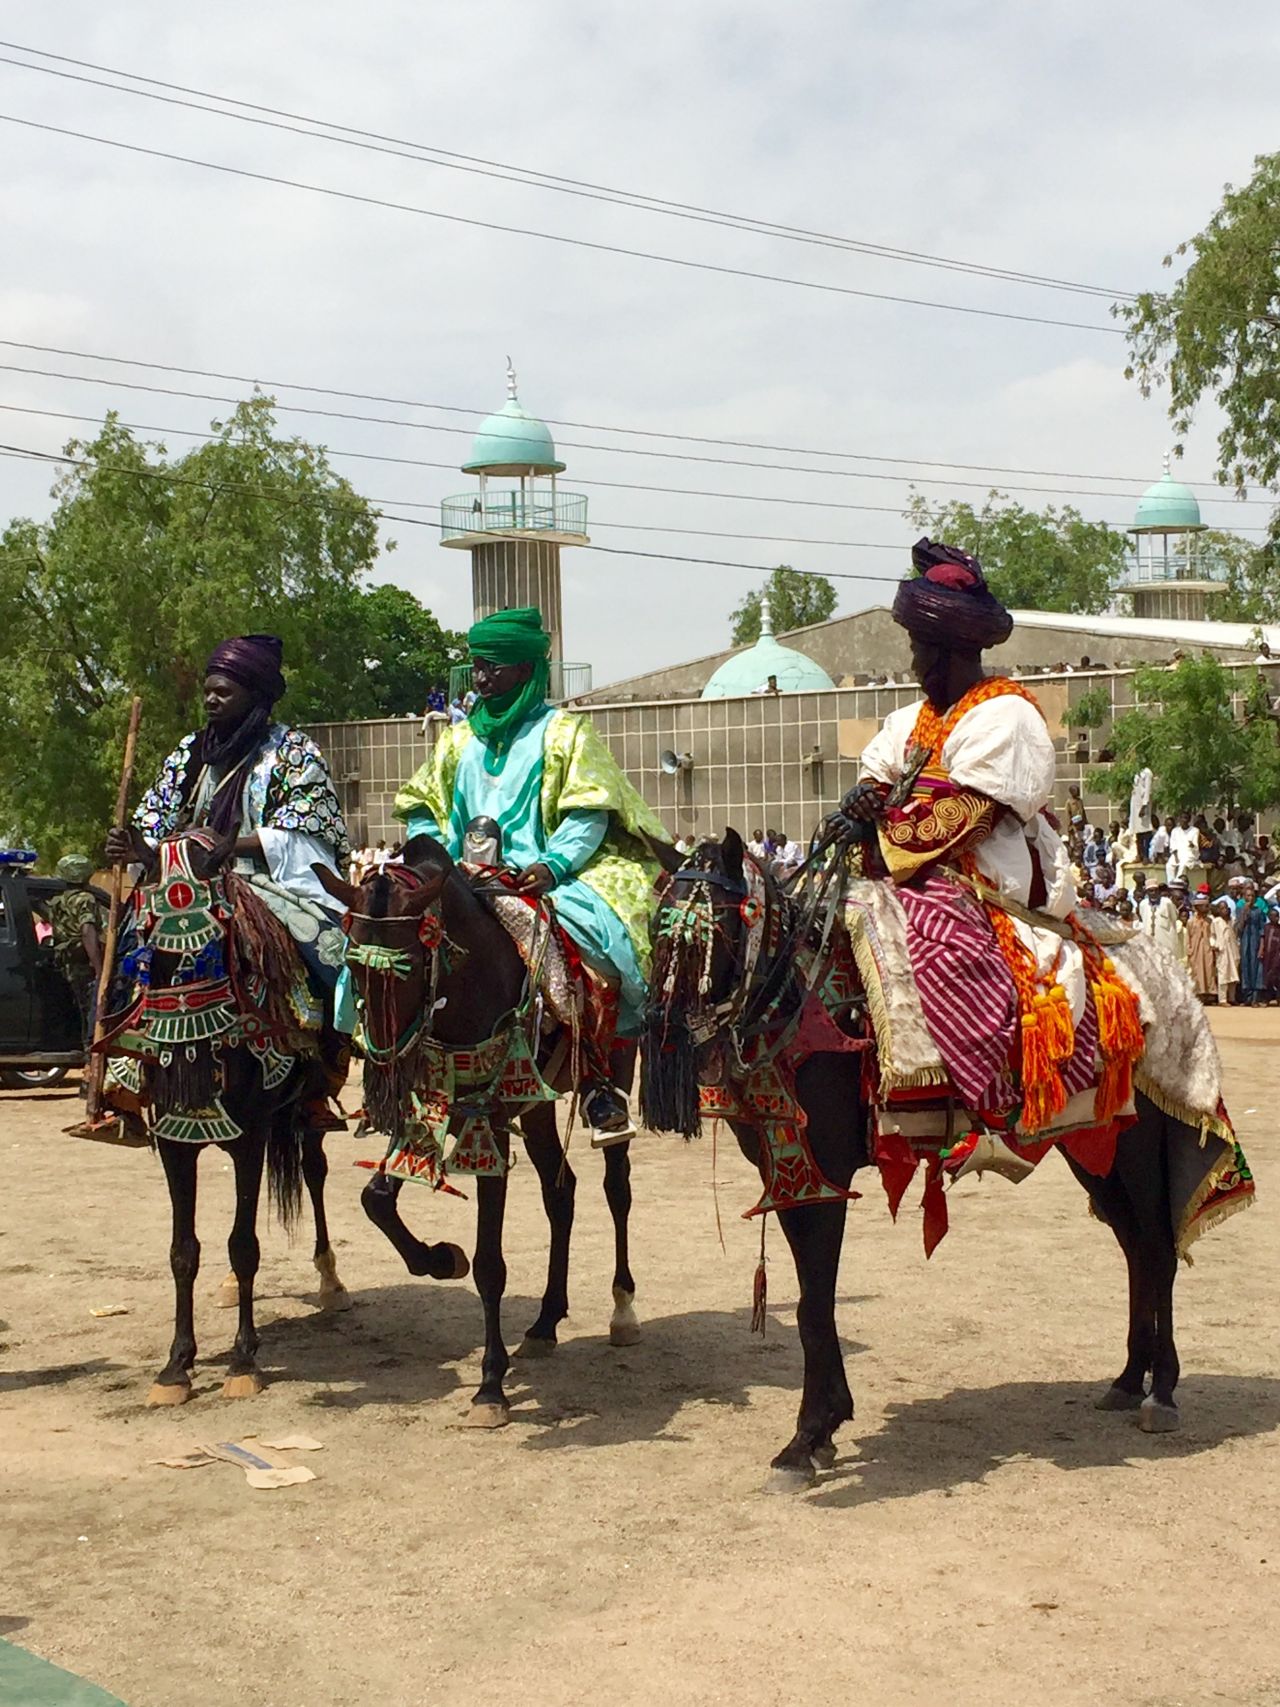 Nigeria is host to a variety of rich and diverse cultural traditions across its states. This time of year in Northern Nigeria, a part of the country rich with the history of ancient Islamic kingdoms, the annual Durbar Festival is celebrated in states like Kano, Katsina, Zaria and Sokoto. [Photos by Enuma Okoro]<br />